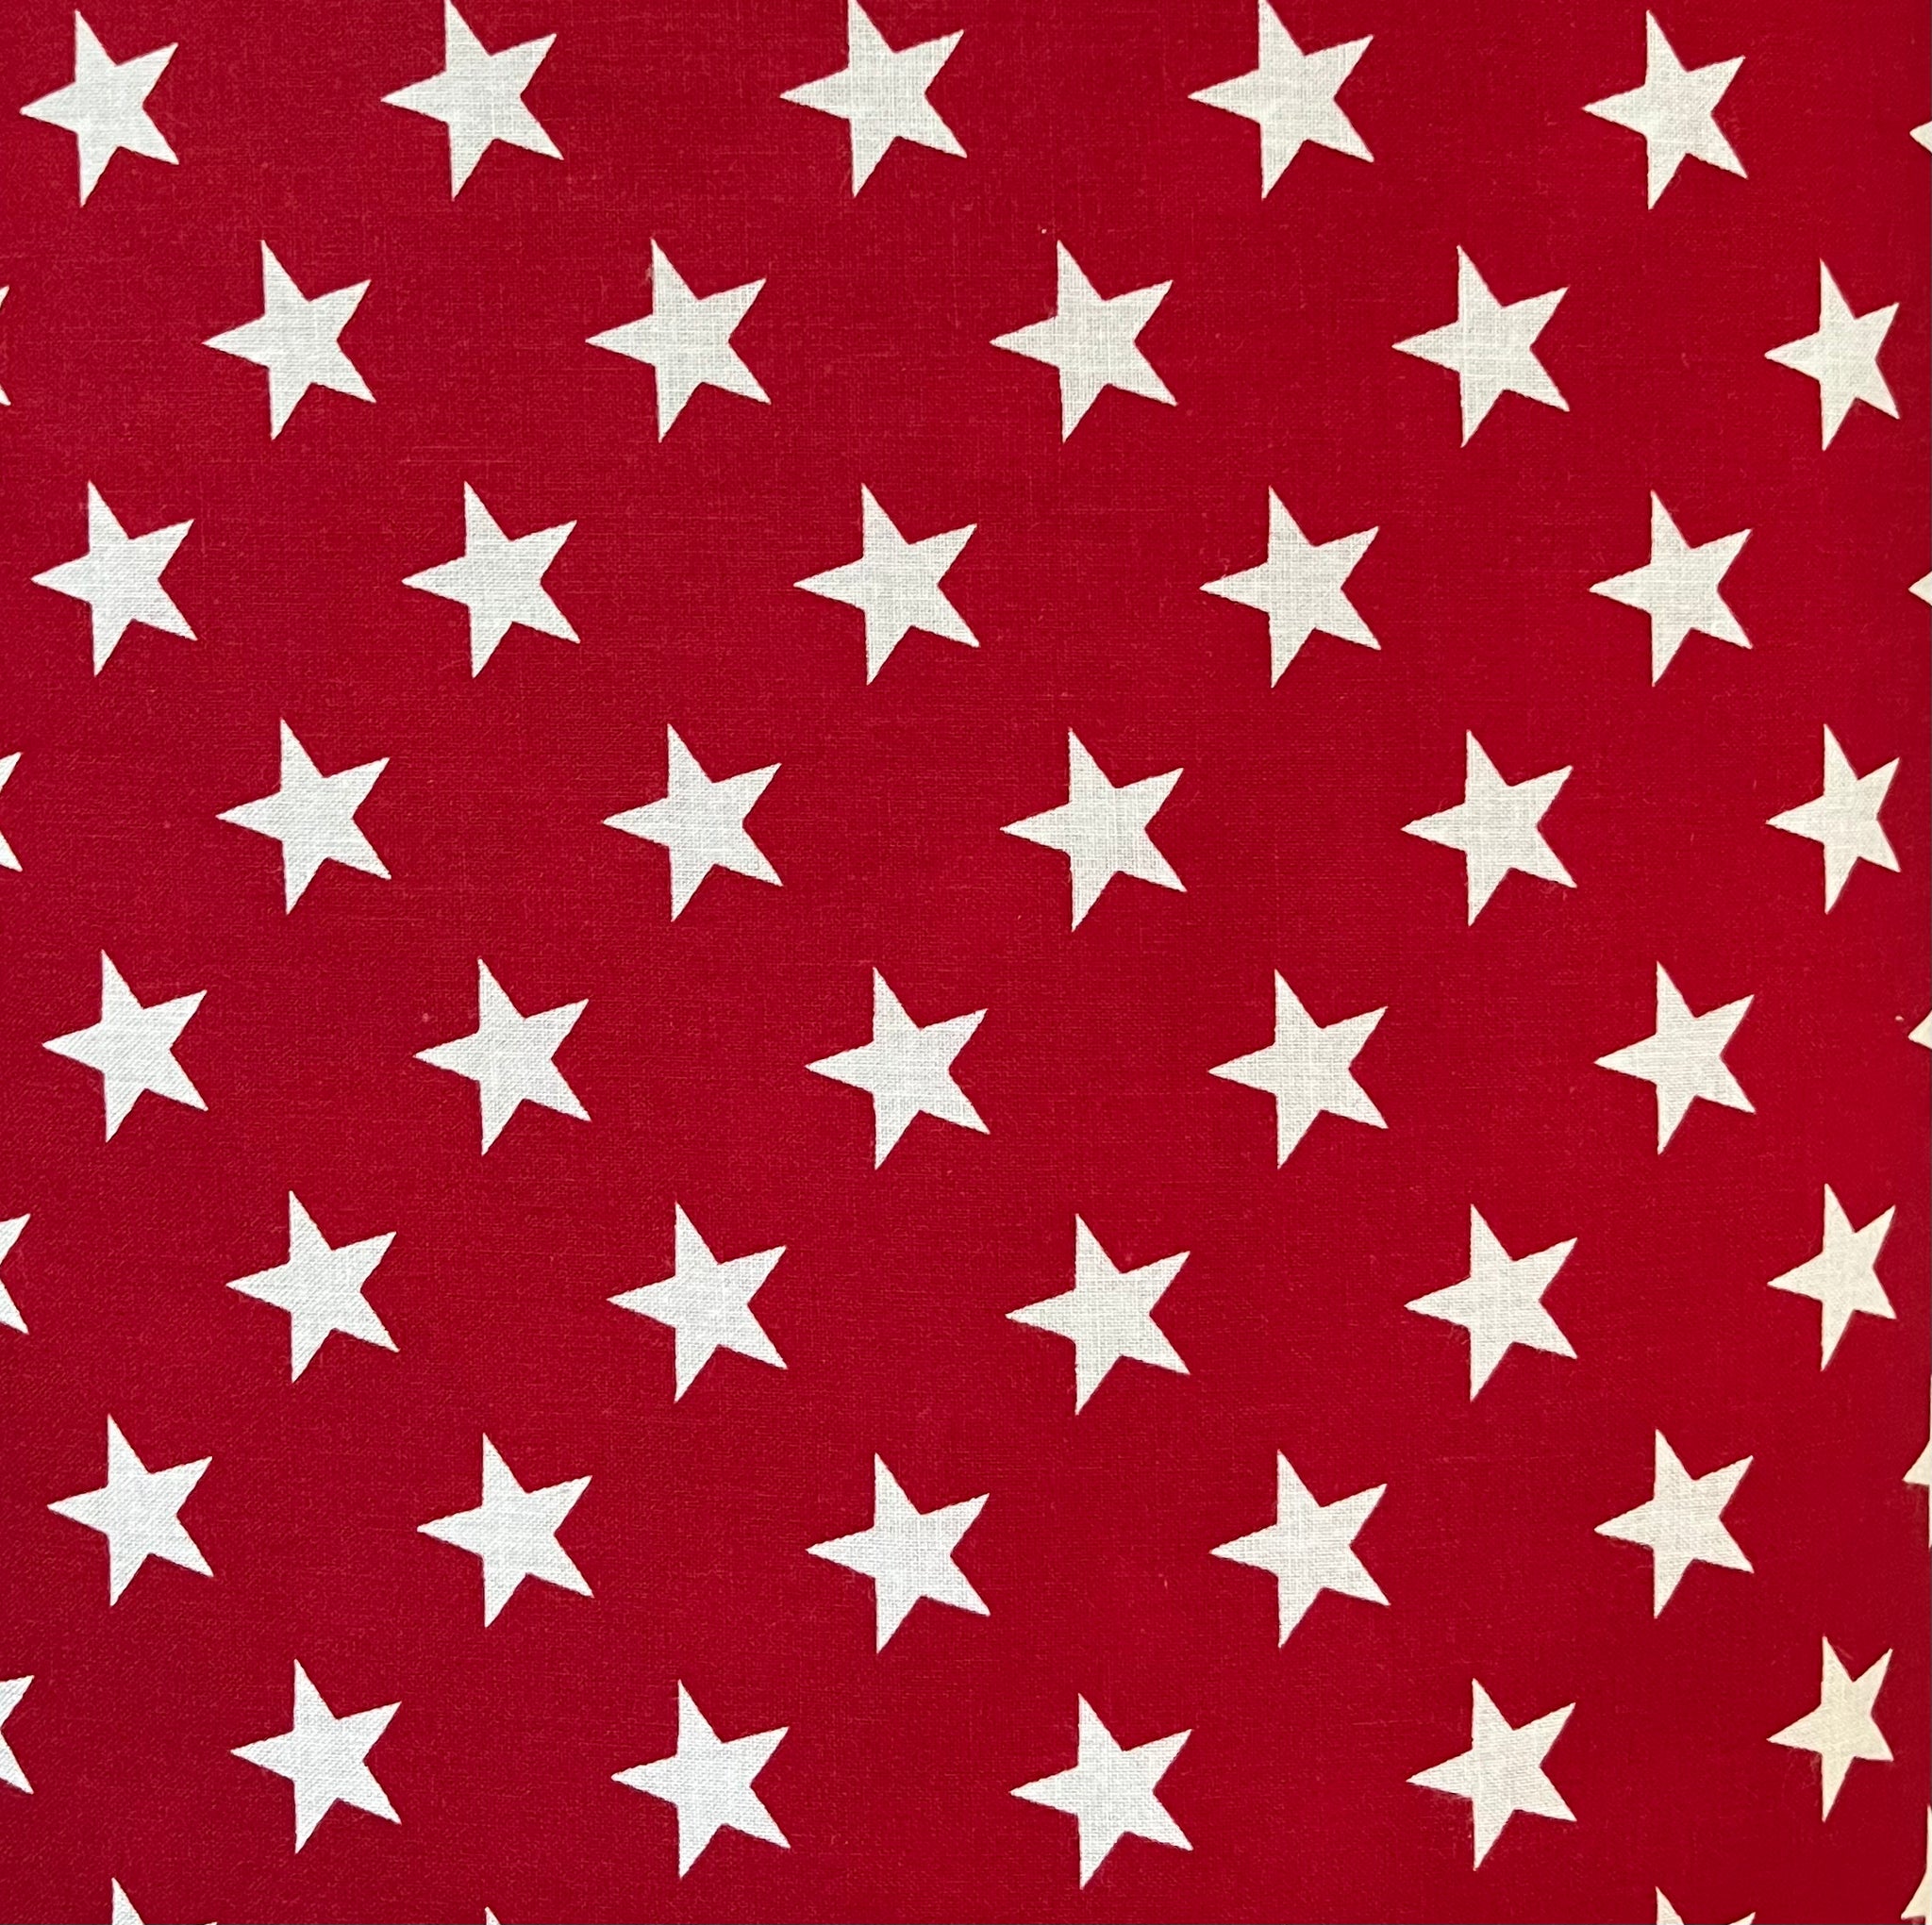 WIDEBACK COTTON - 108" wide Cotton - Red and White Stars (1/2 yard)